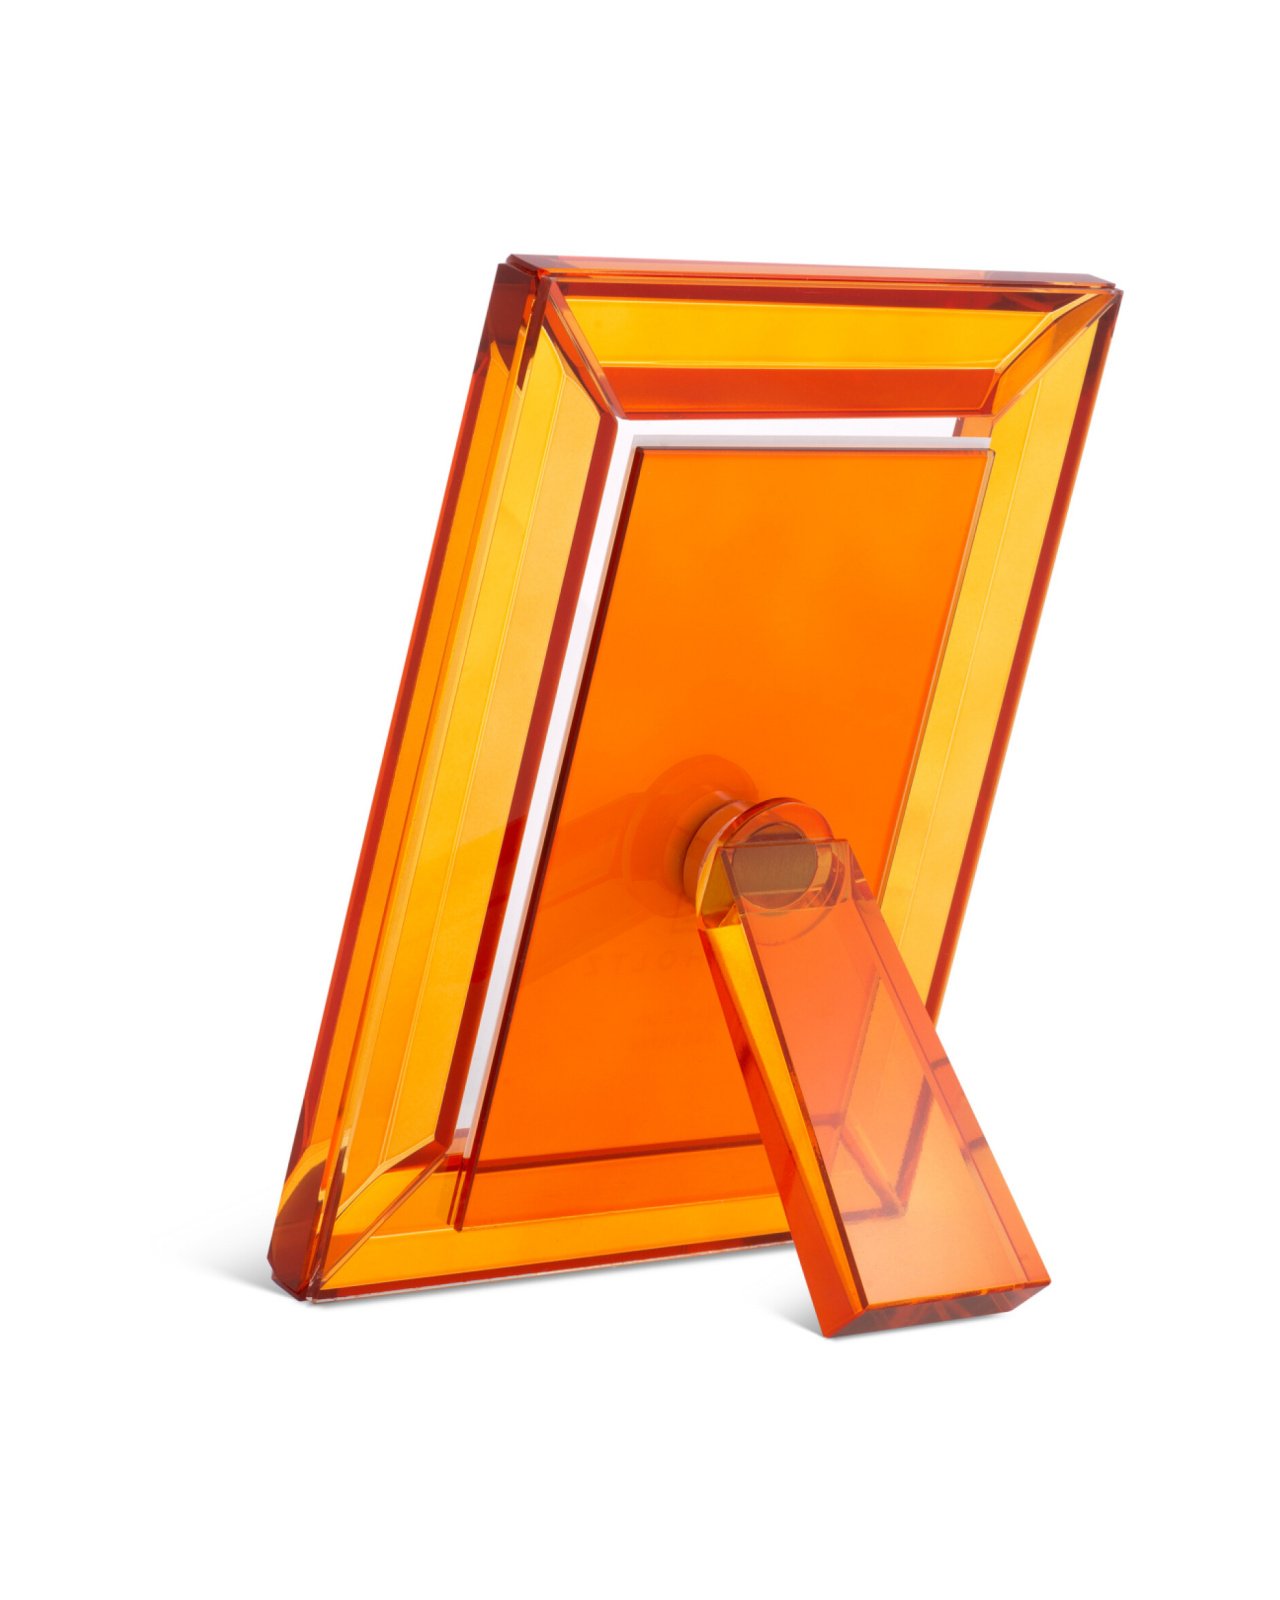 Theory Picture Frames Orange 2-Set